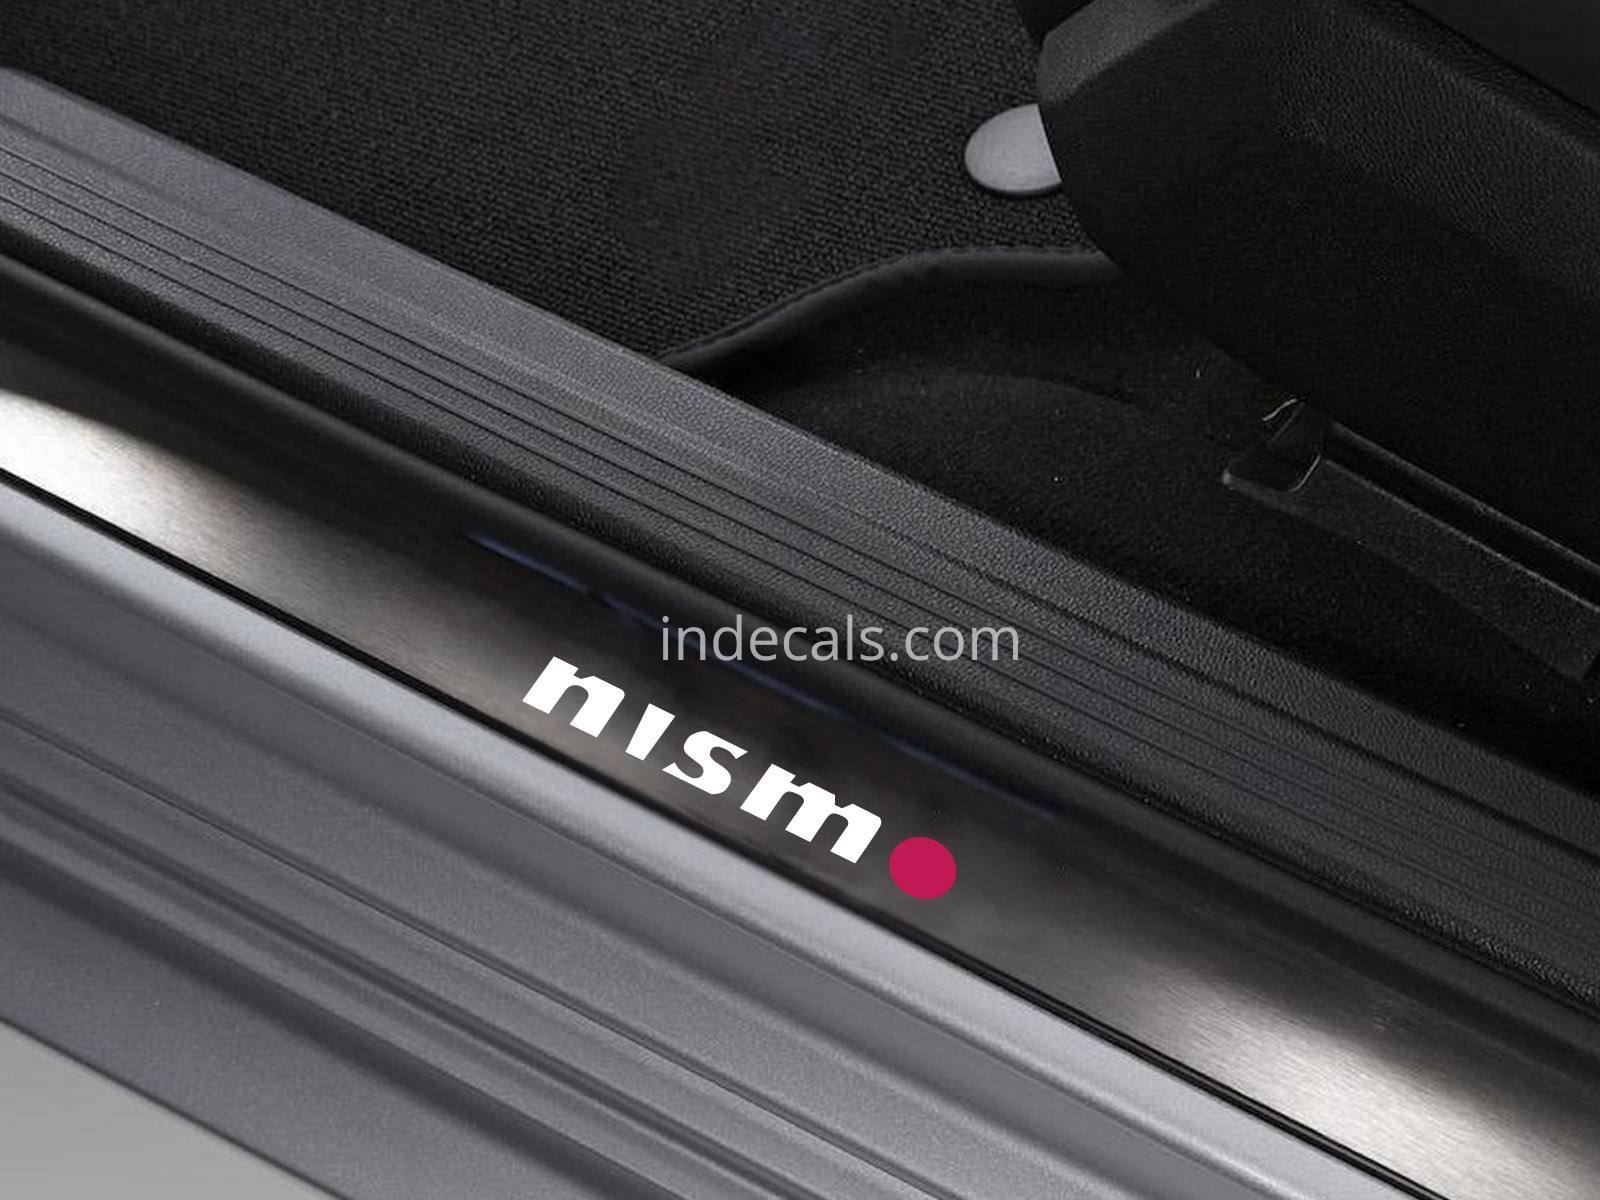 6 x Nismo Stickers for Door Sills - White